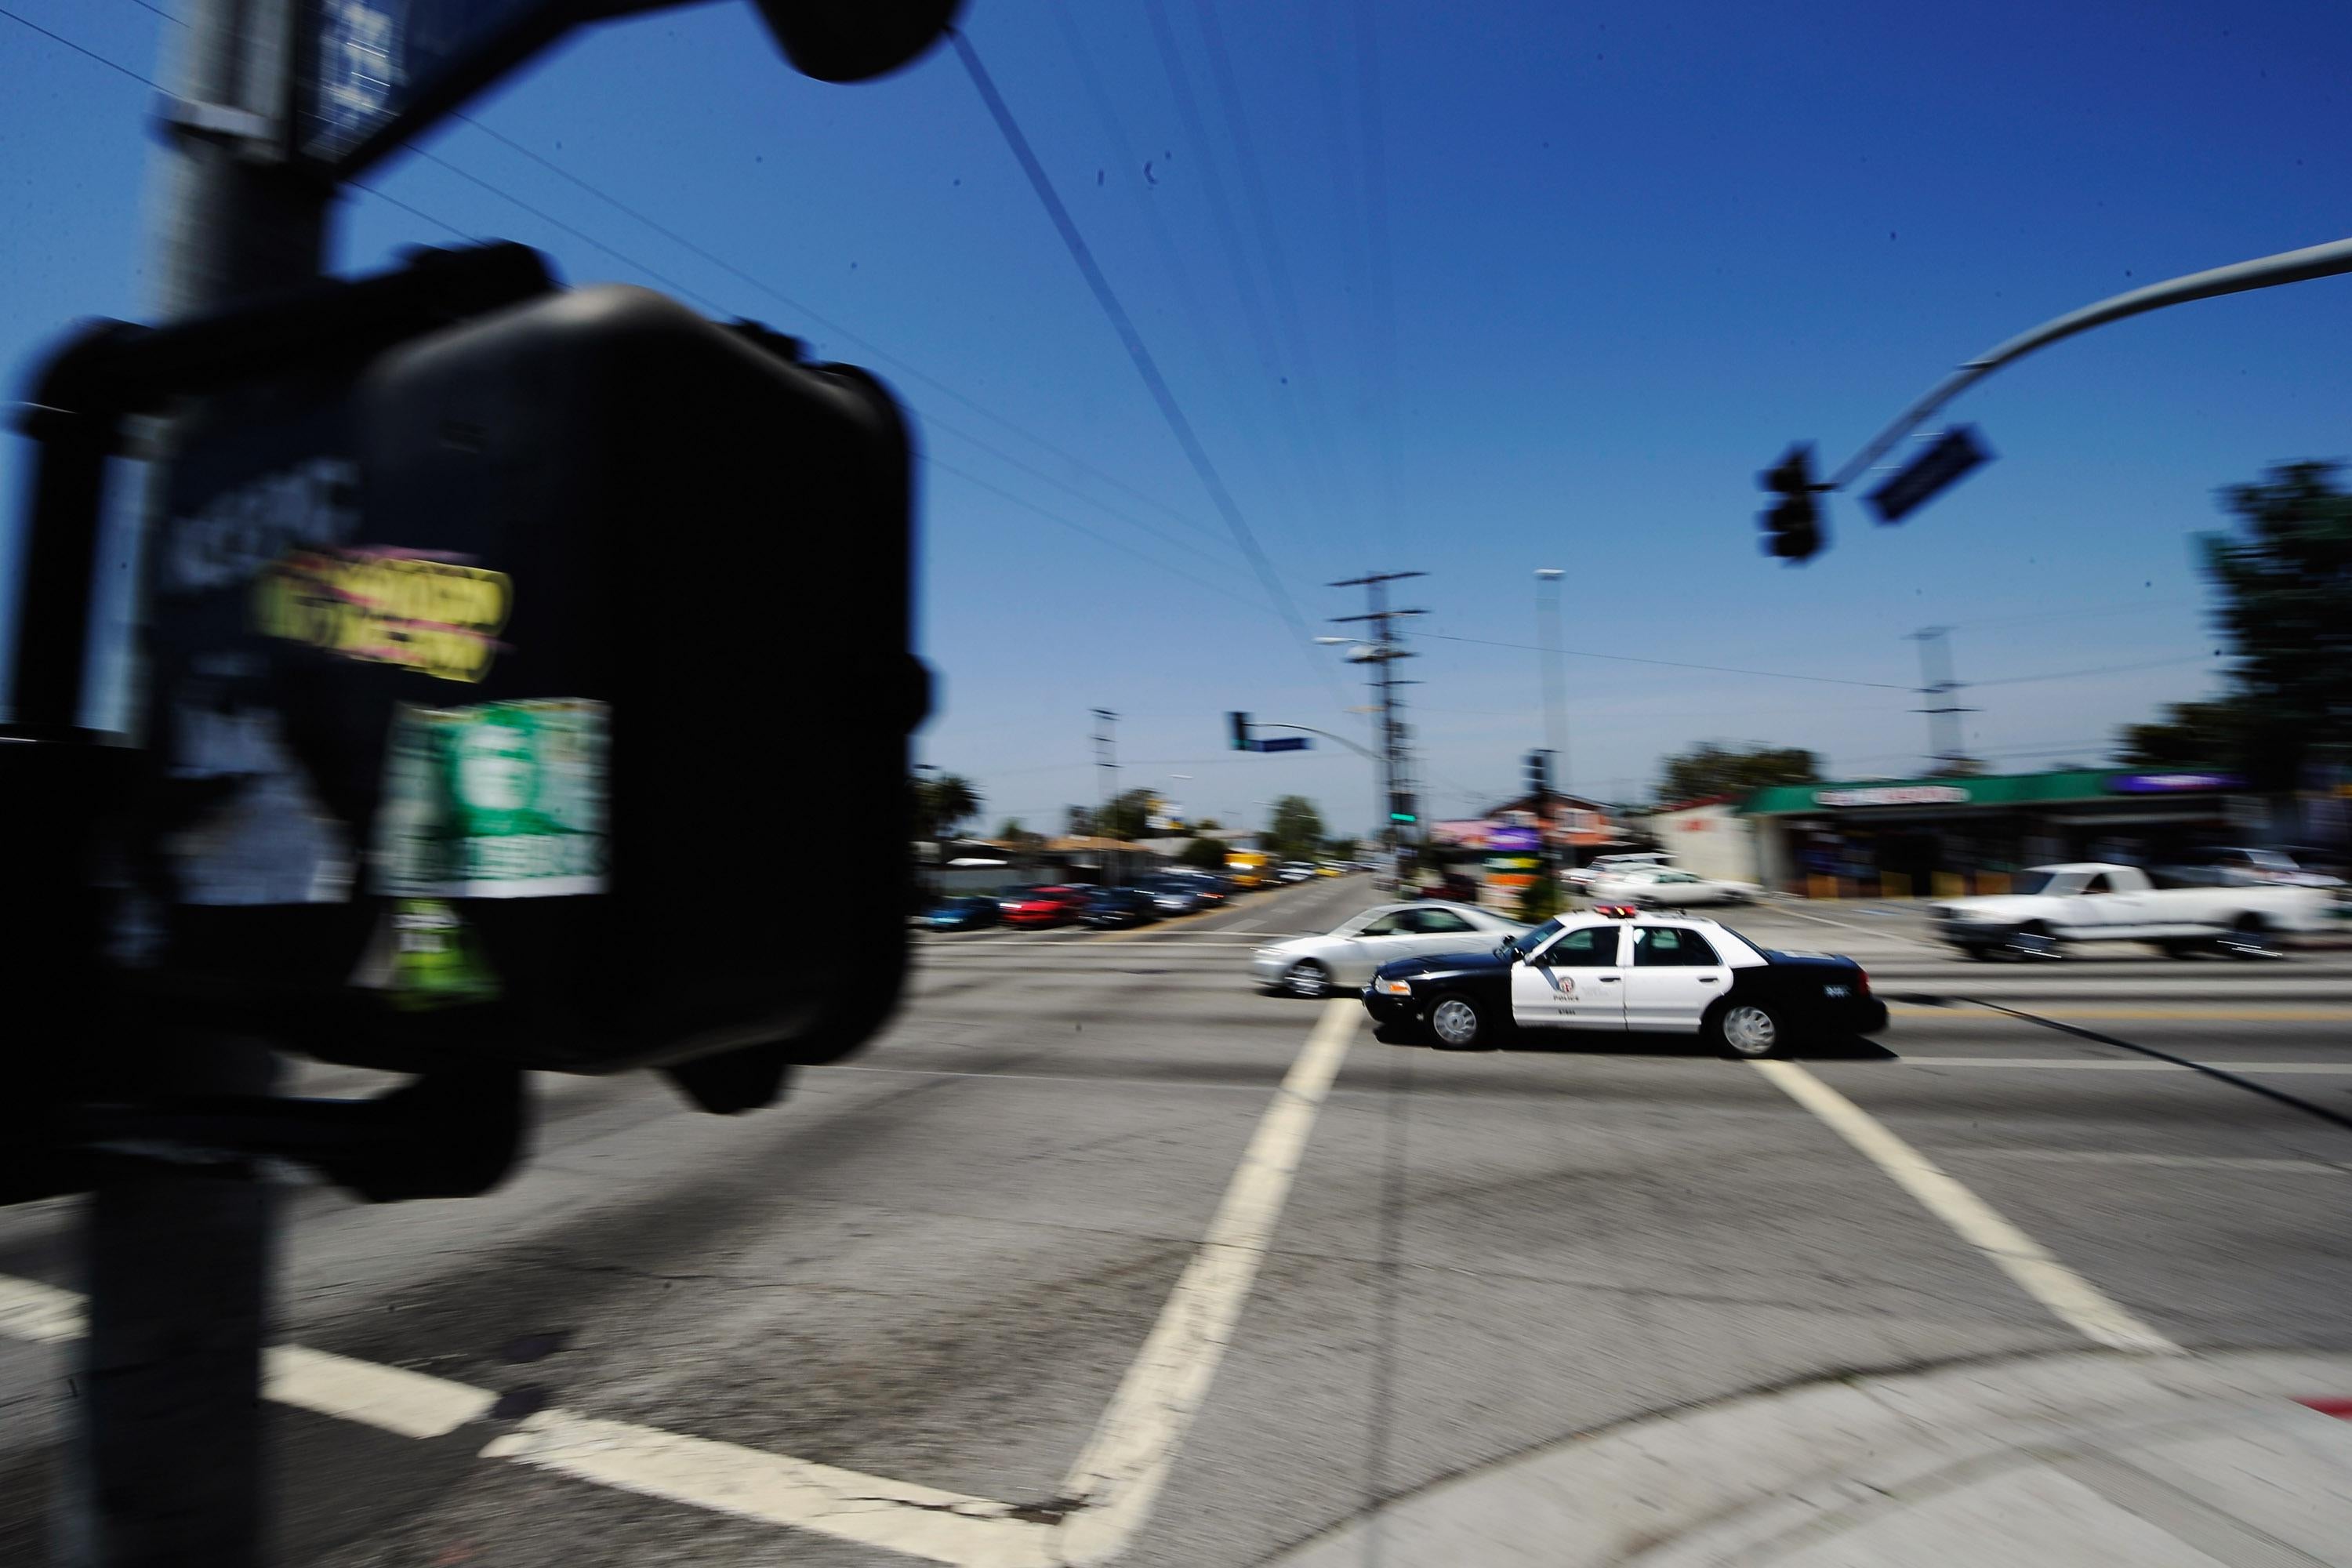 A Los Angeles Police Department car with lights and sirens going rushes through an intersection.